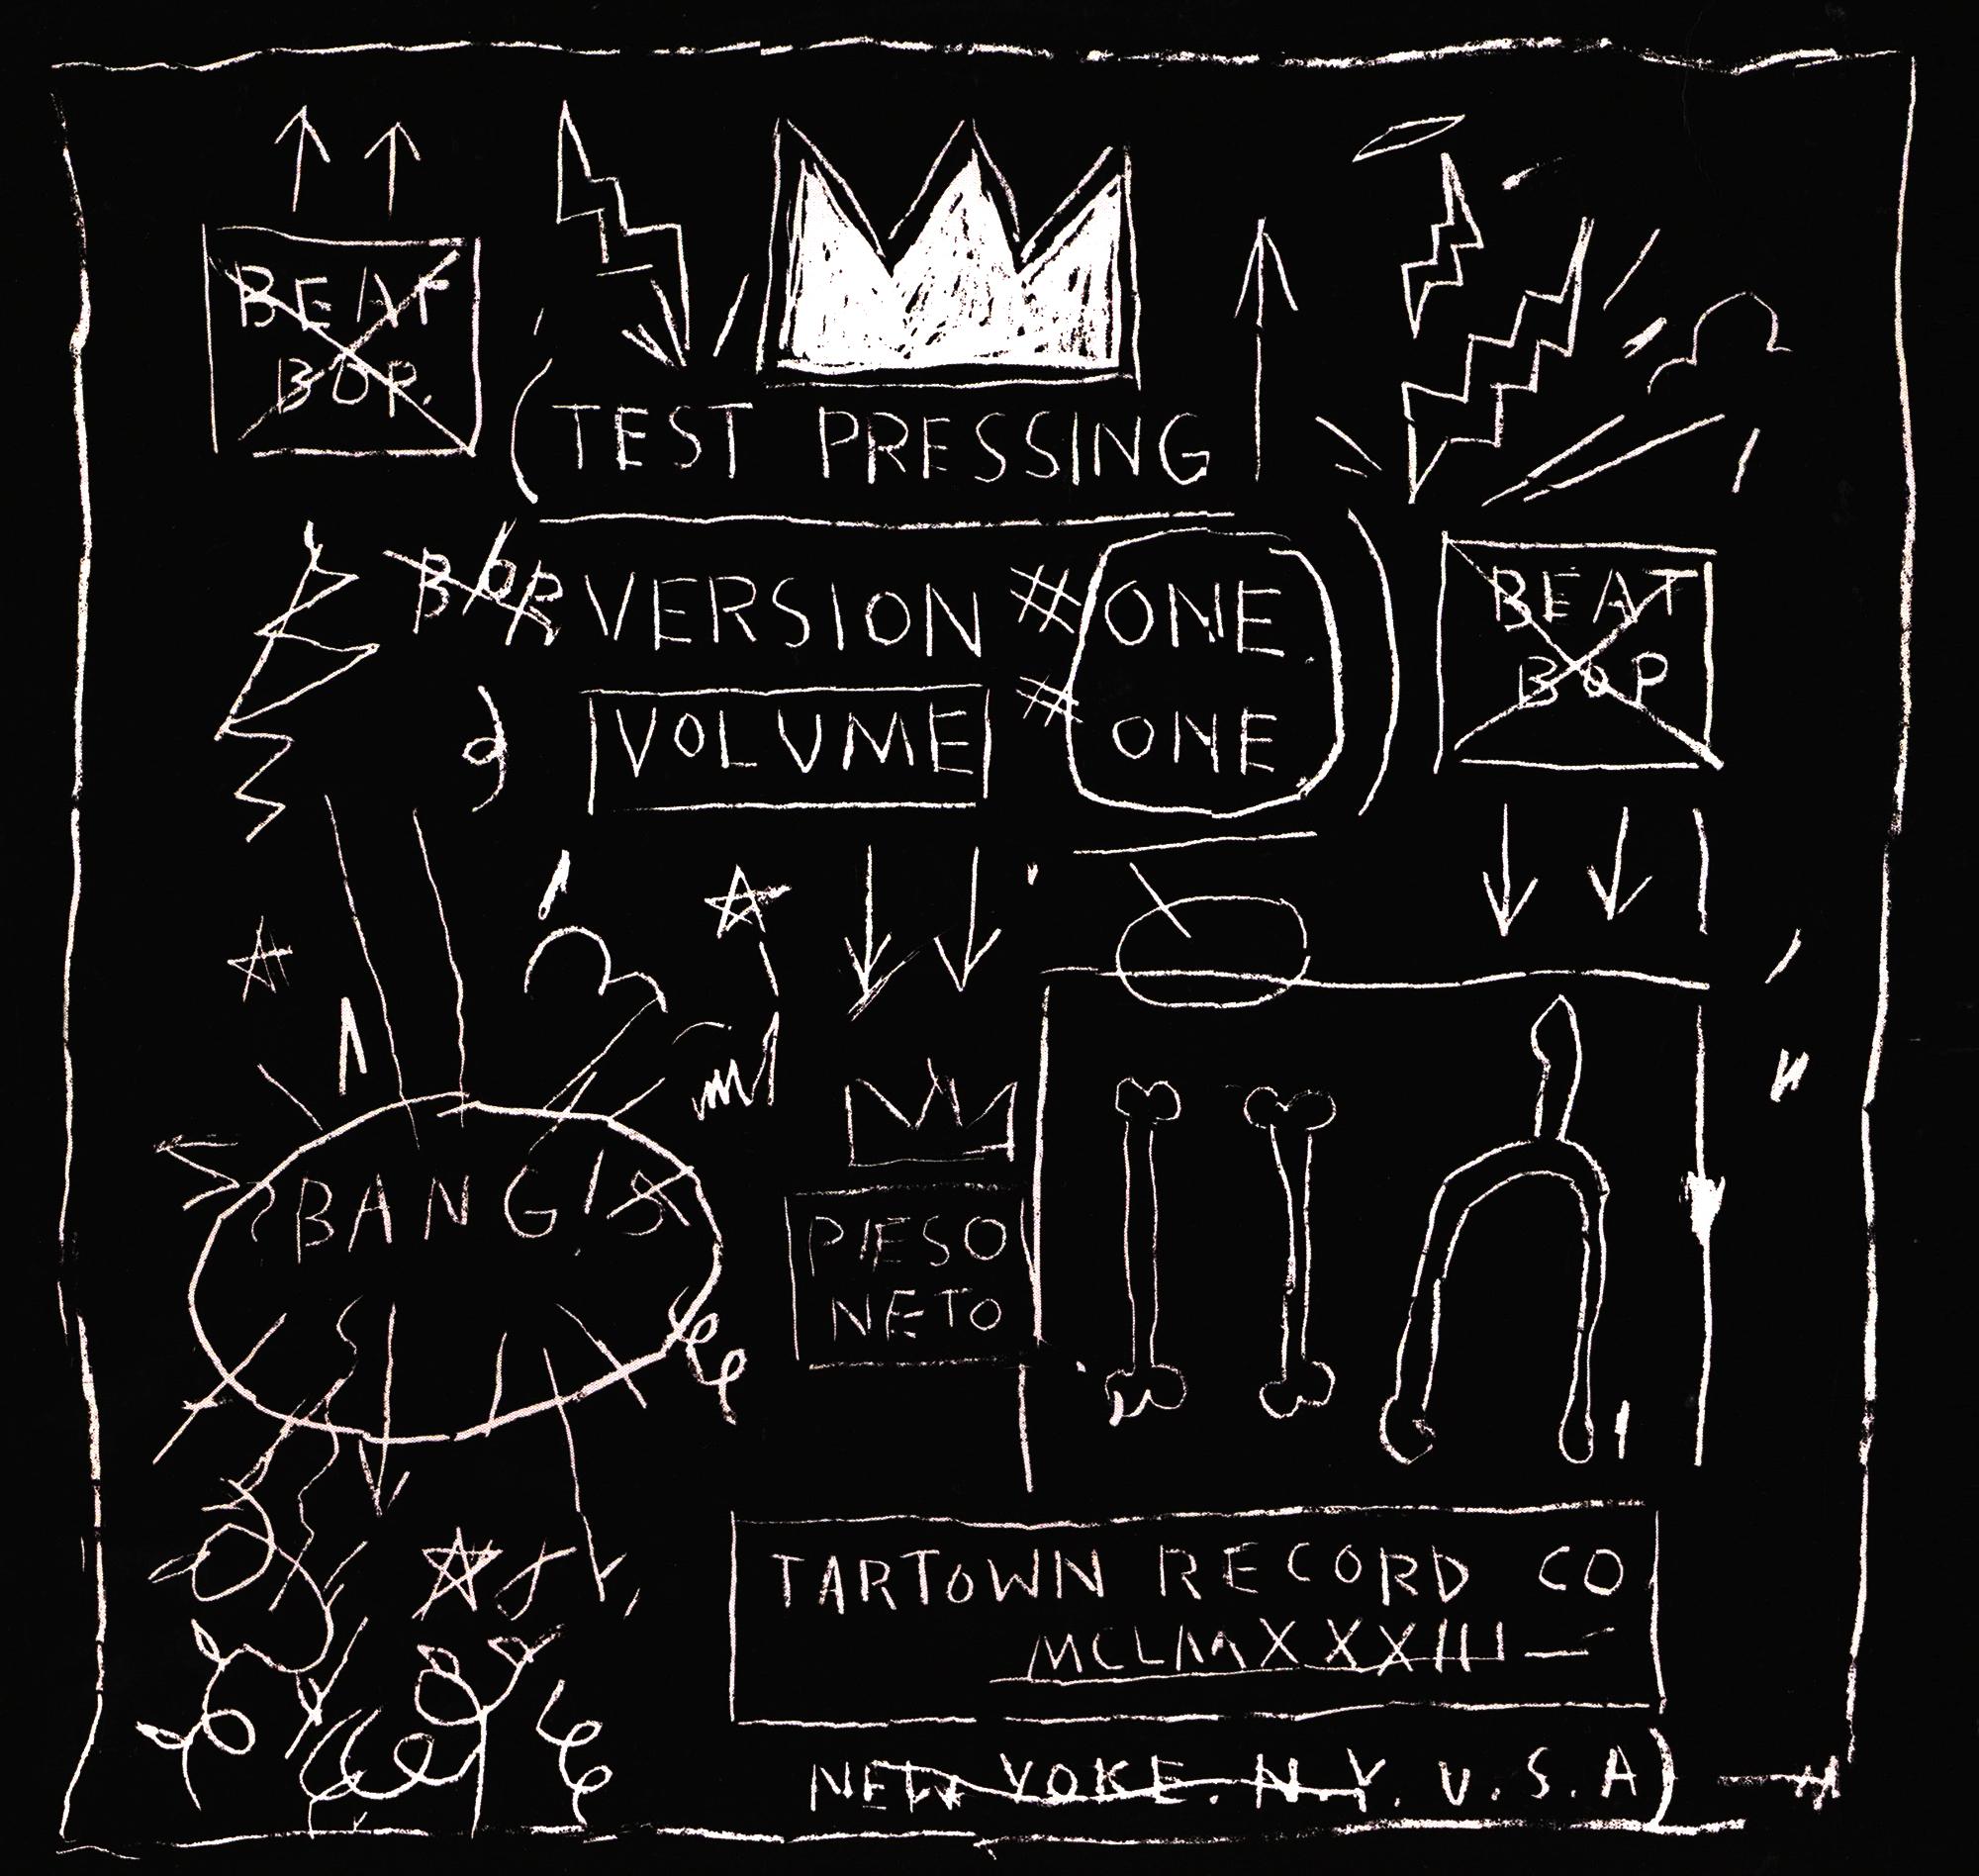 Basquiat Haring and Warhol Designed Record Covers - Pop Art Art by Andy Warhol